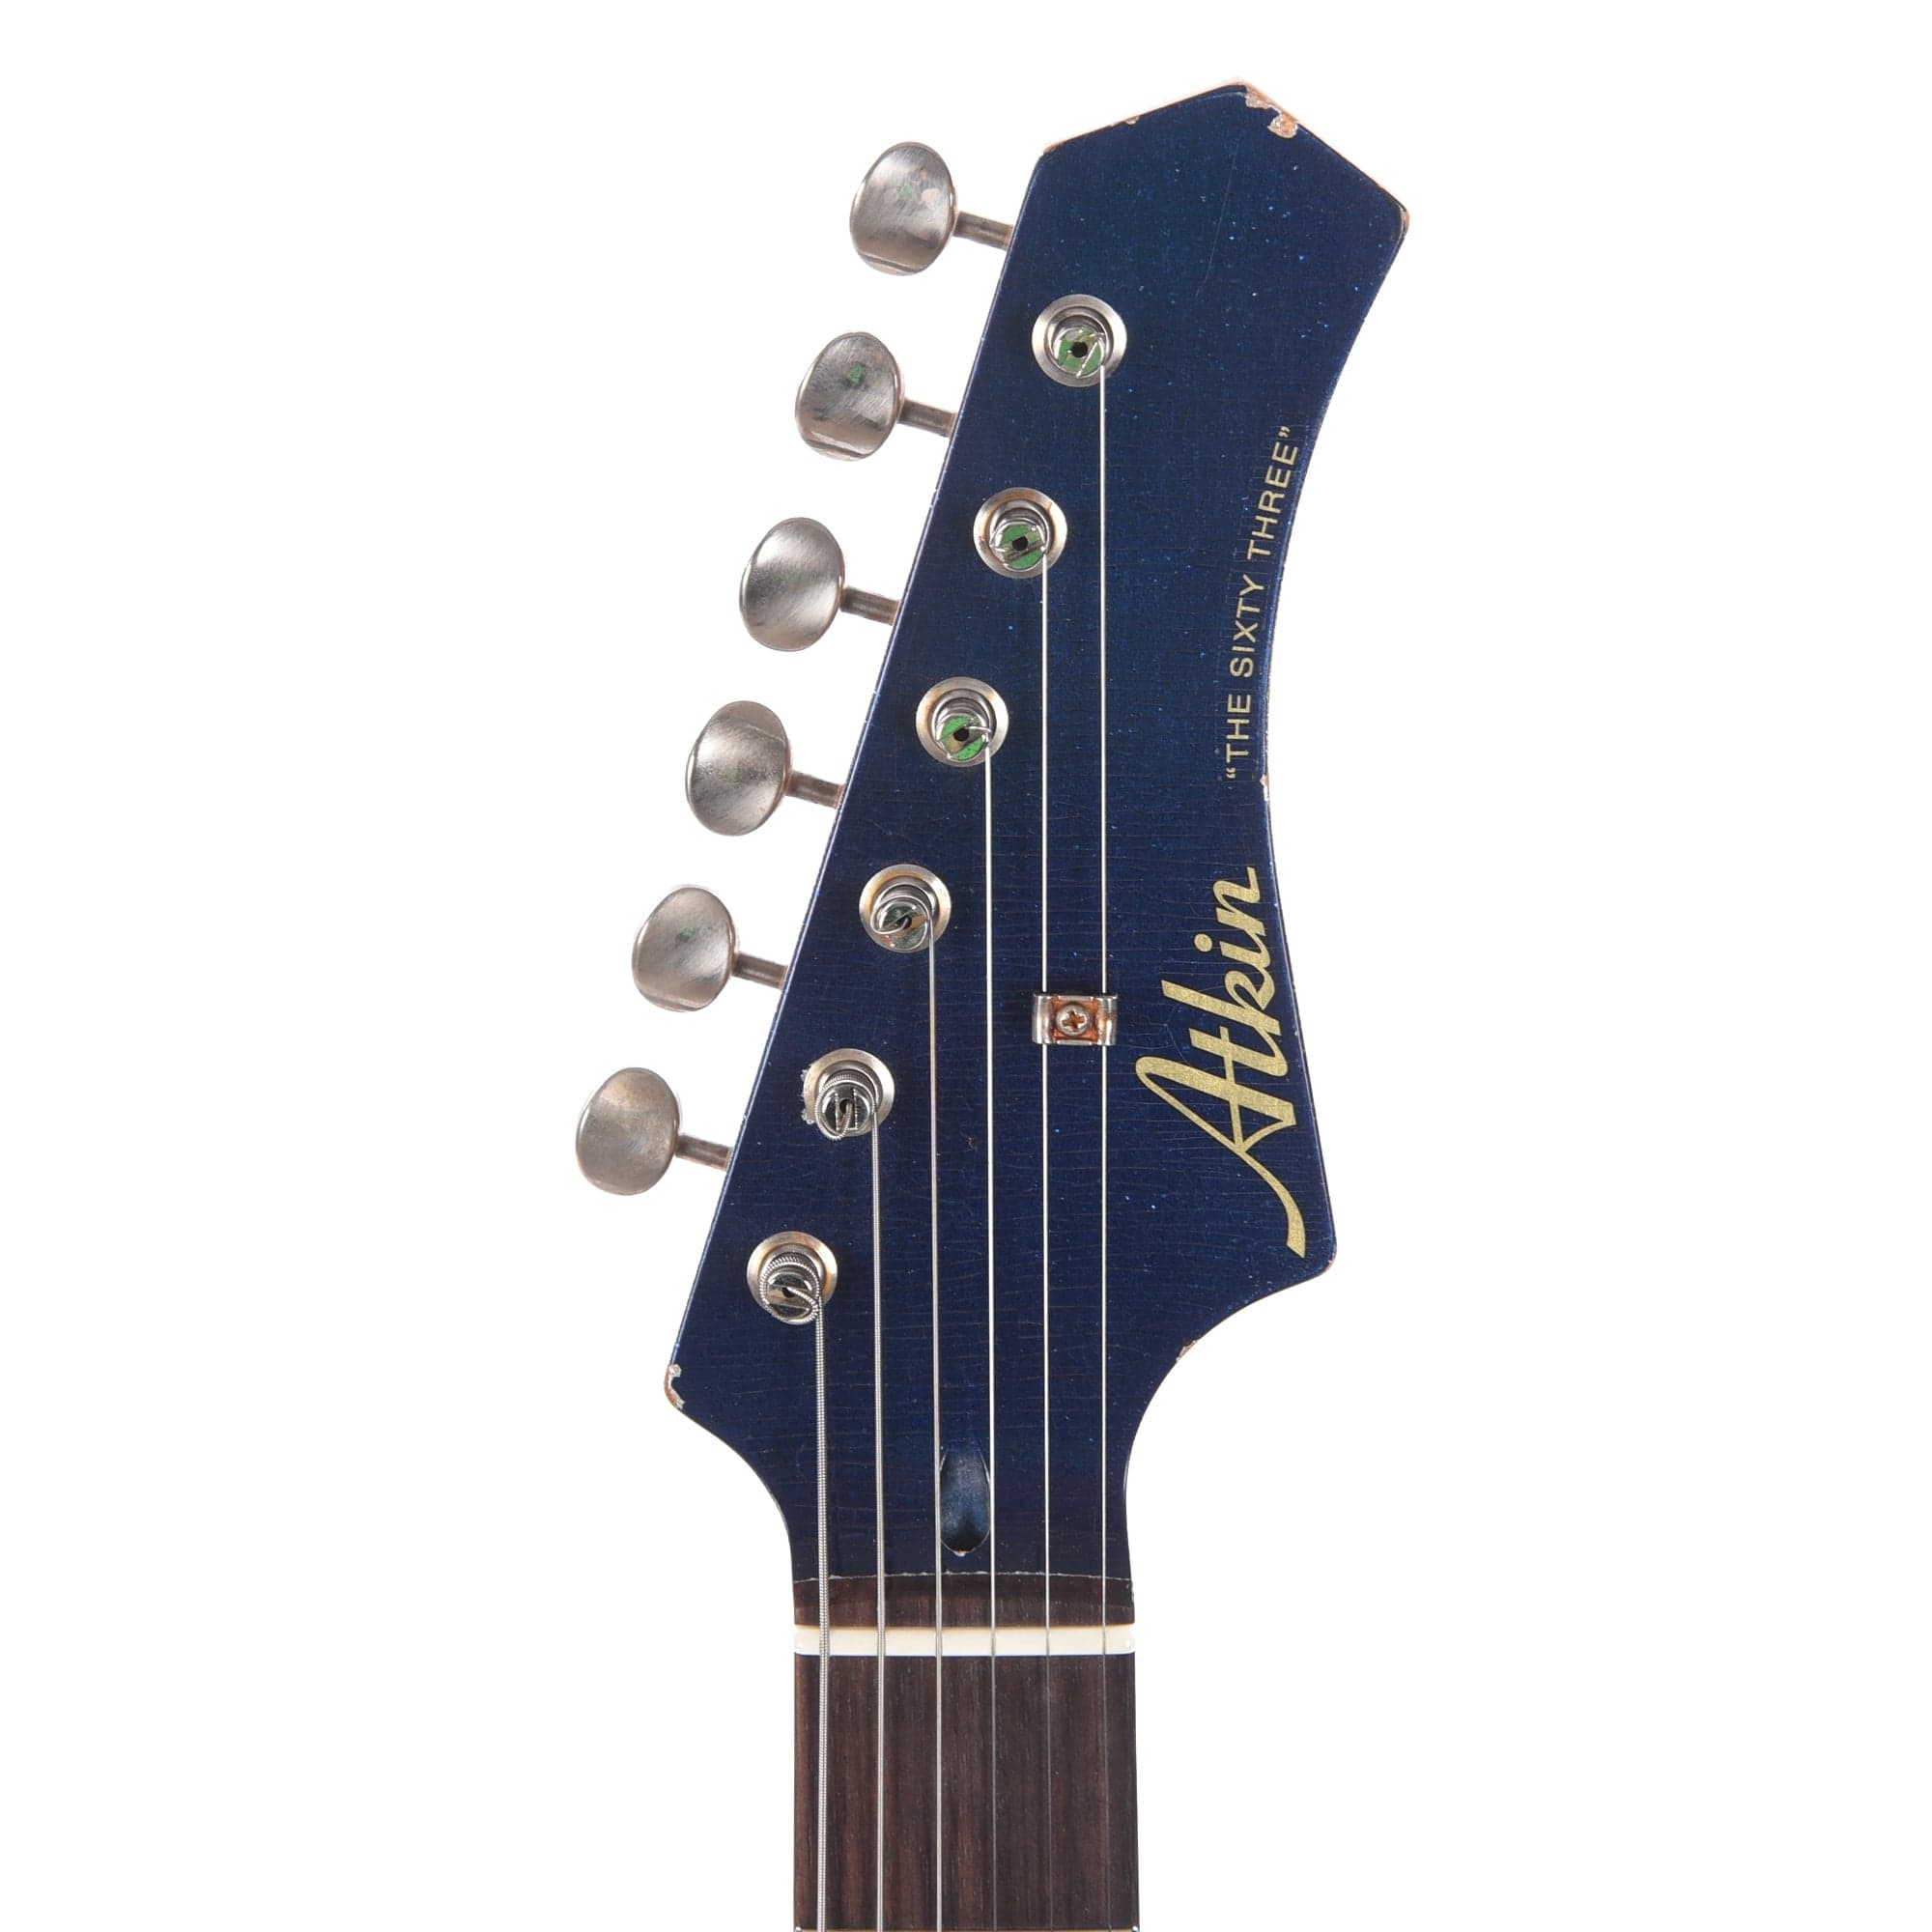 Atkin 63 S-Style Classic Aged Brunswick Blue Sparkle w/Roasted Flame Maple Neck (Serial #082) Electric Guitars / Solid Body